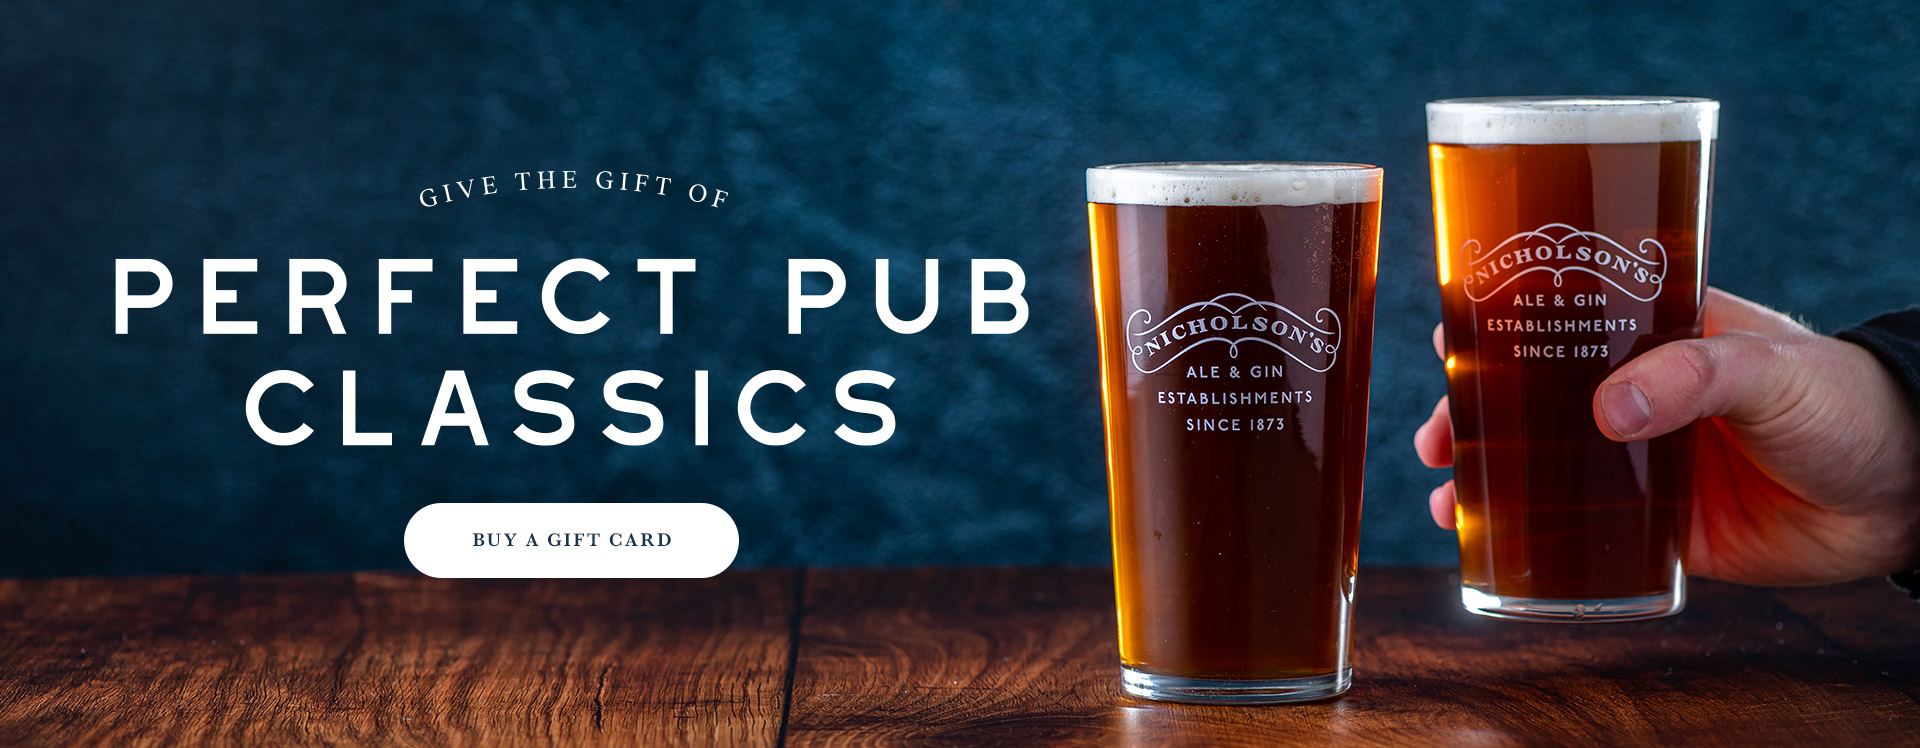 Nicholson’s Pub Gift Voucher at The Porcupine in London